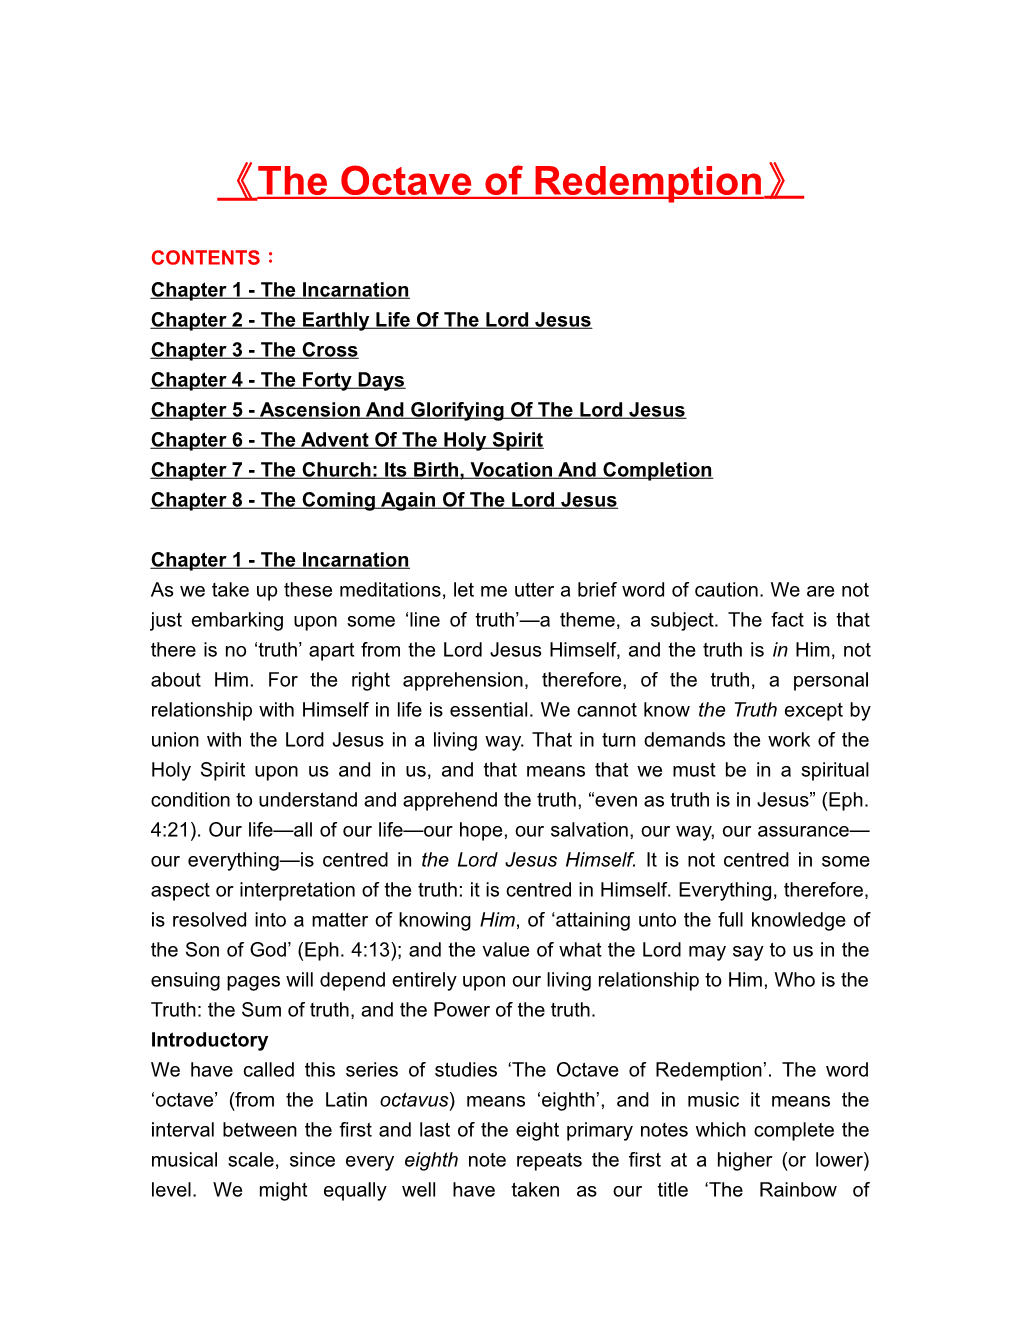 Chapter 2 - the Earthly Life of the Lord Jesus